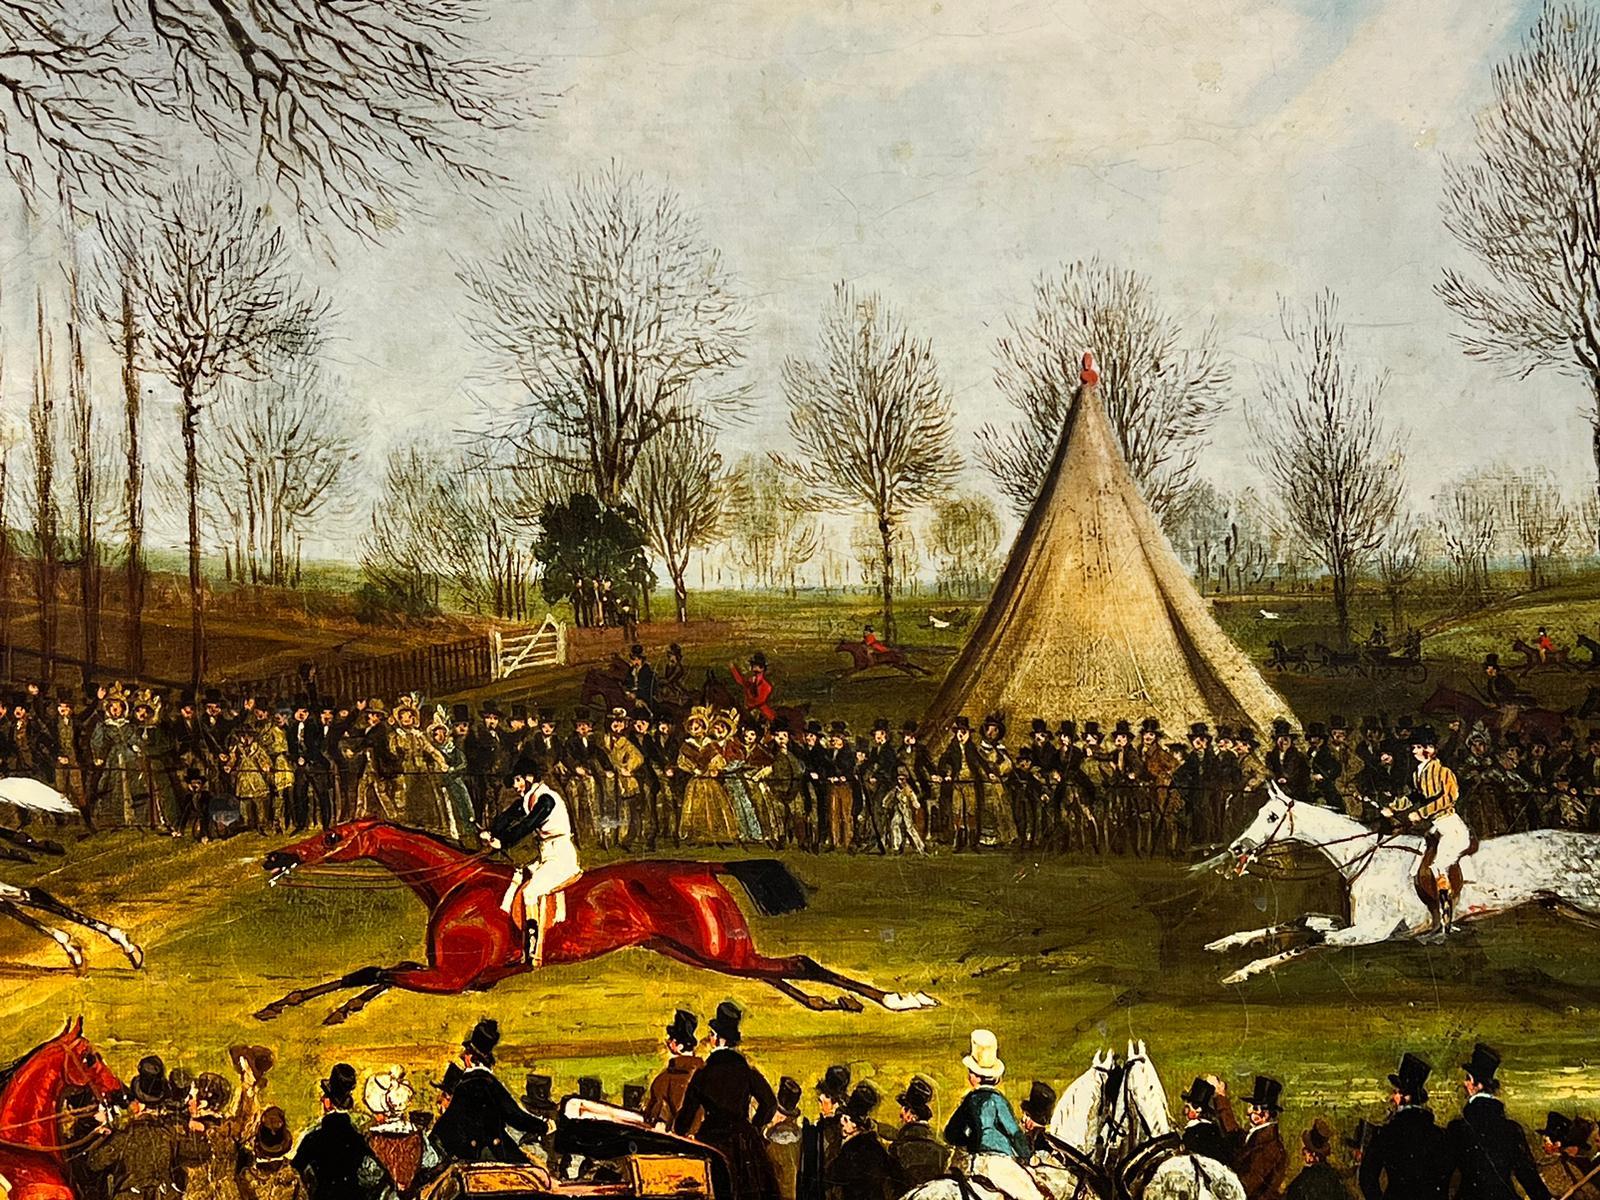 Classic Large Scale British Horse Racing Country Steeple Chase with many Figures - Victorian Painting by James Pollard